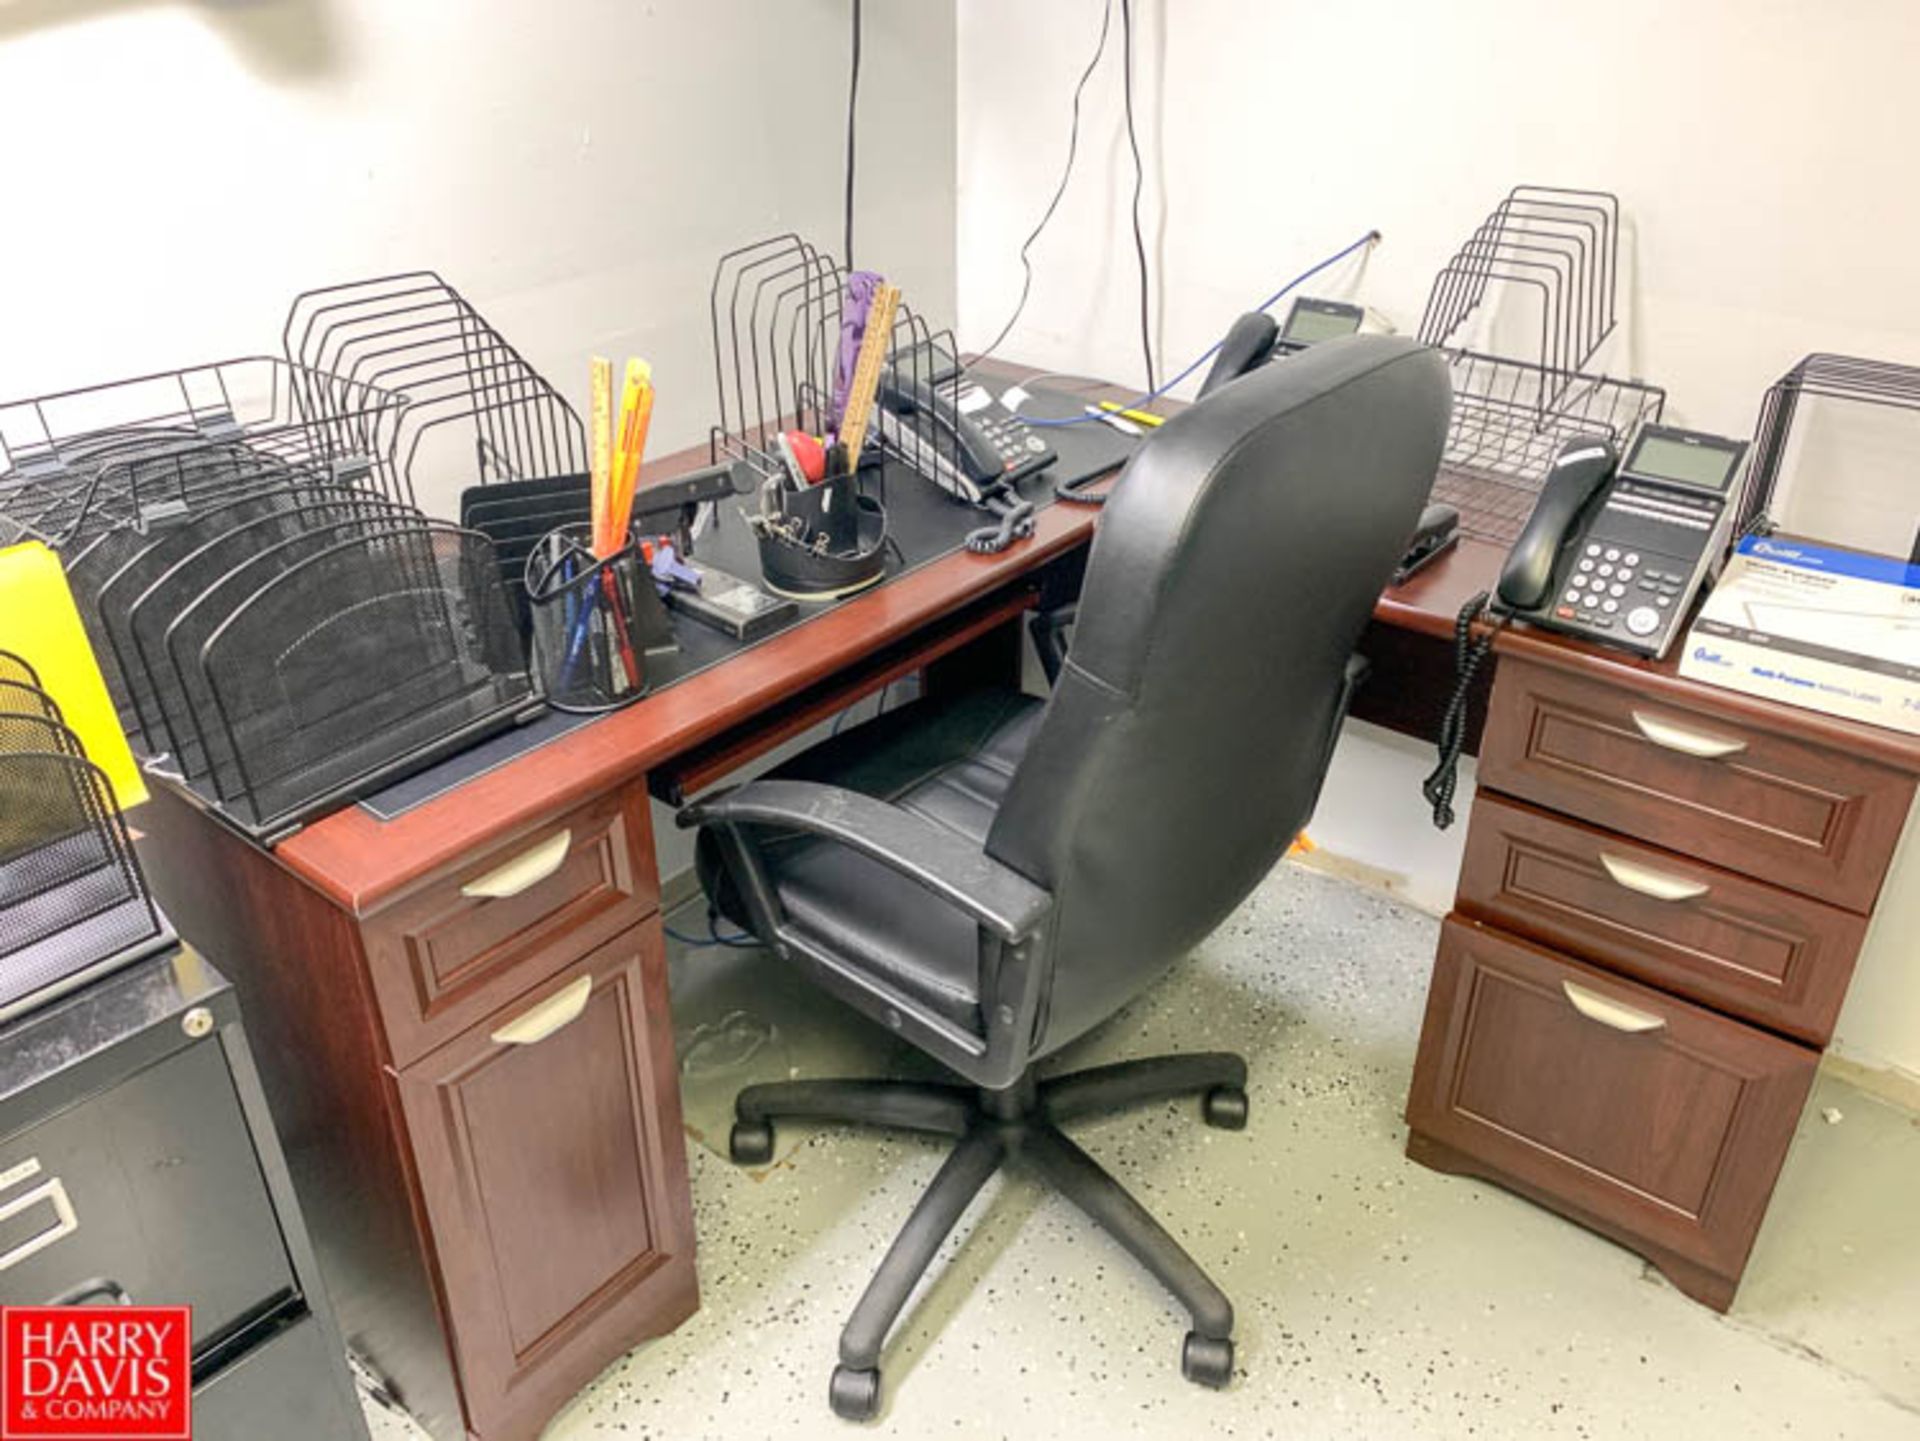 Desks, File Cabinets, Chairs and Office Supplies - Rigging Fee: $175